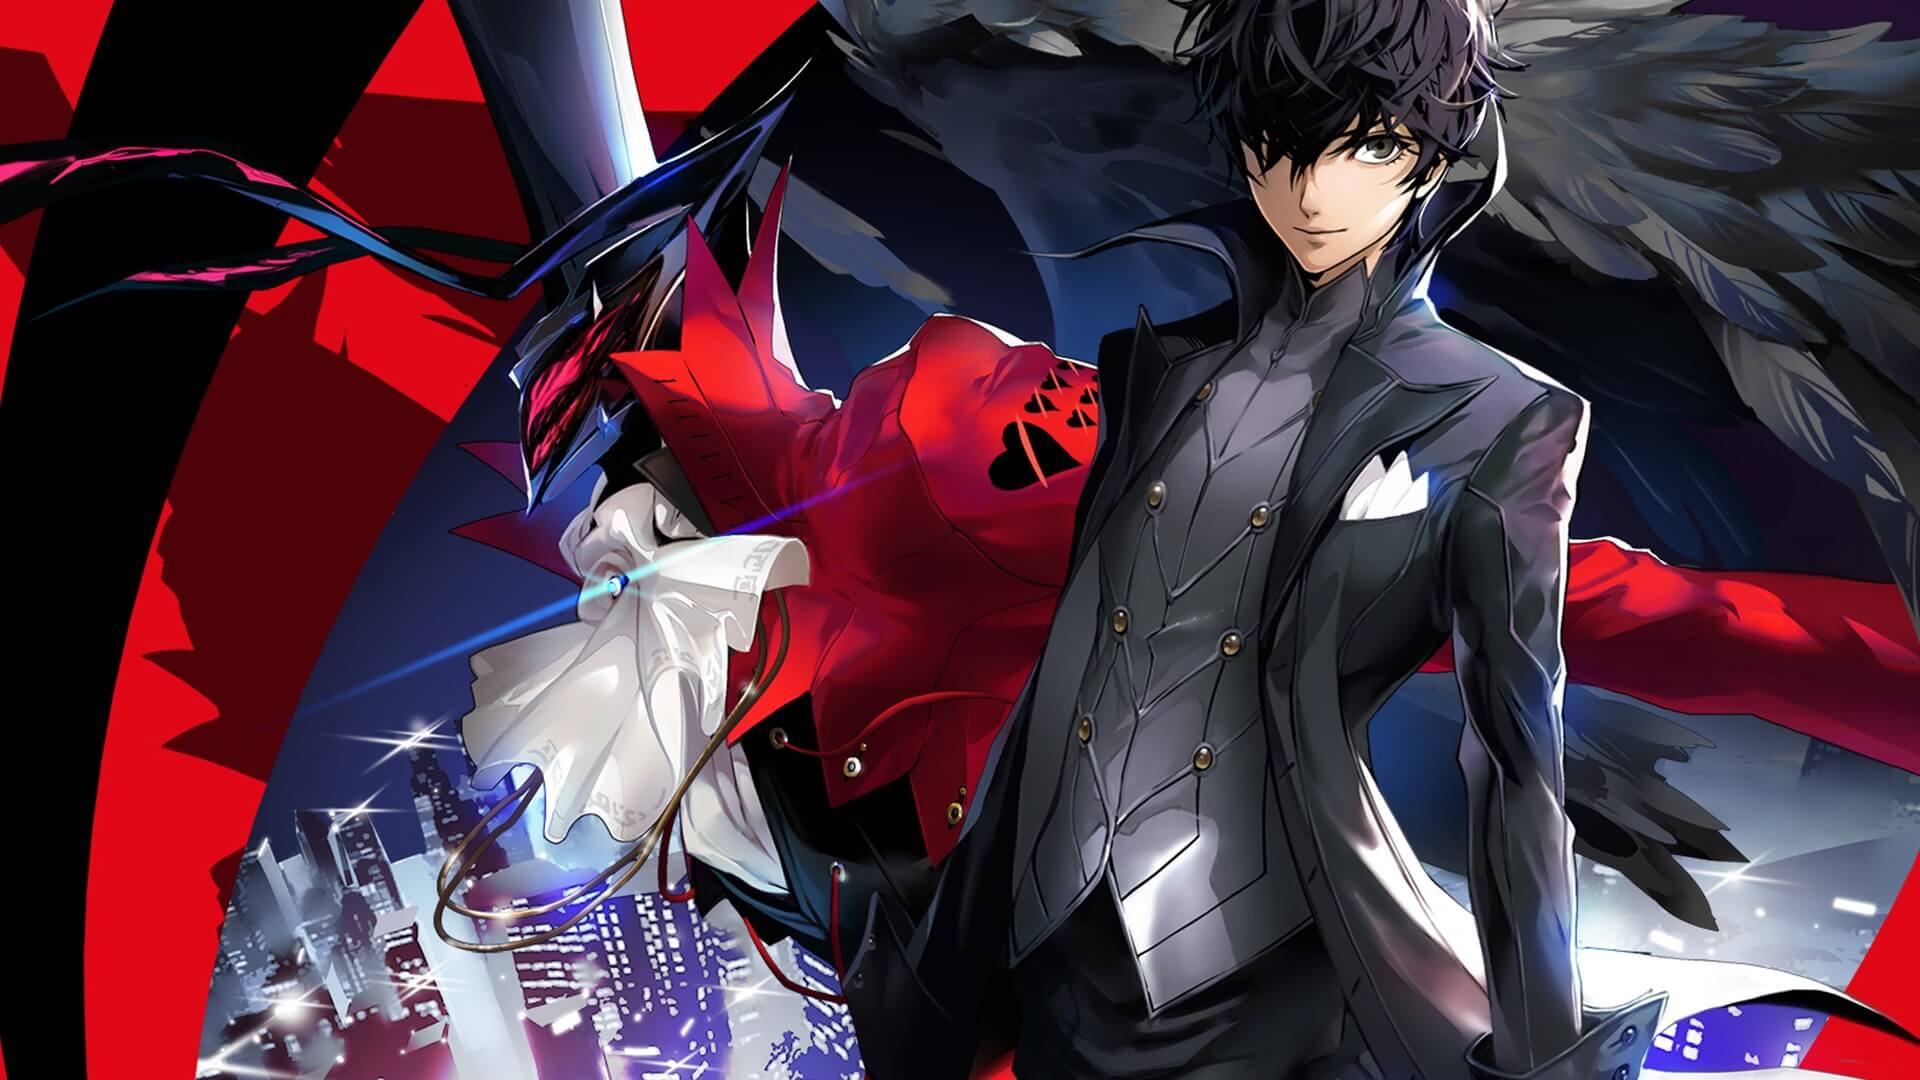 Persona 5 Royal Wallpapers - Top Free Persona 5 Royal Backgrounds ...